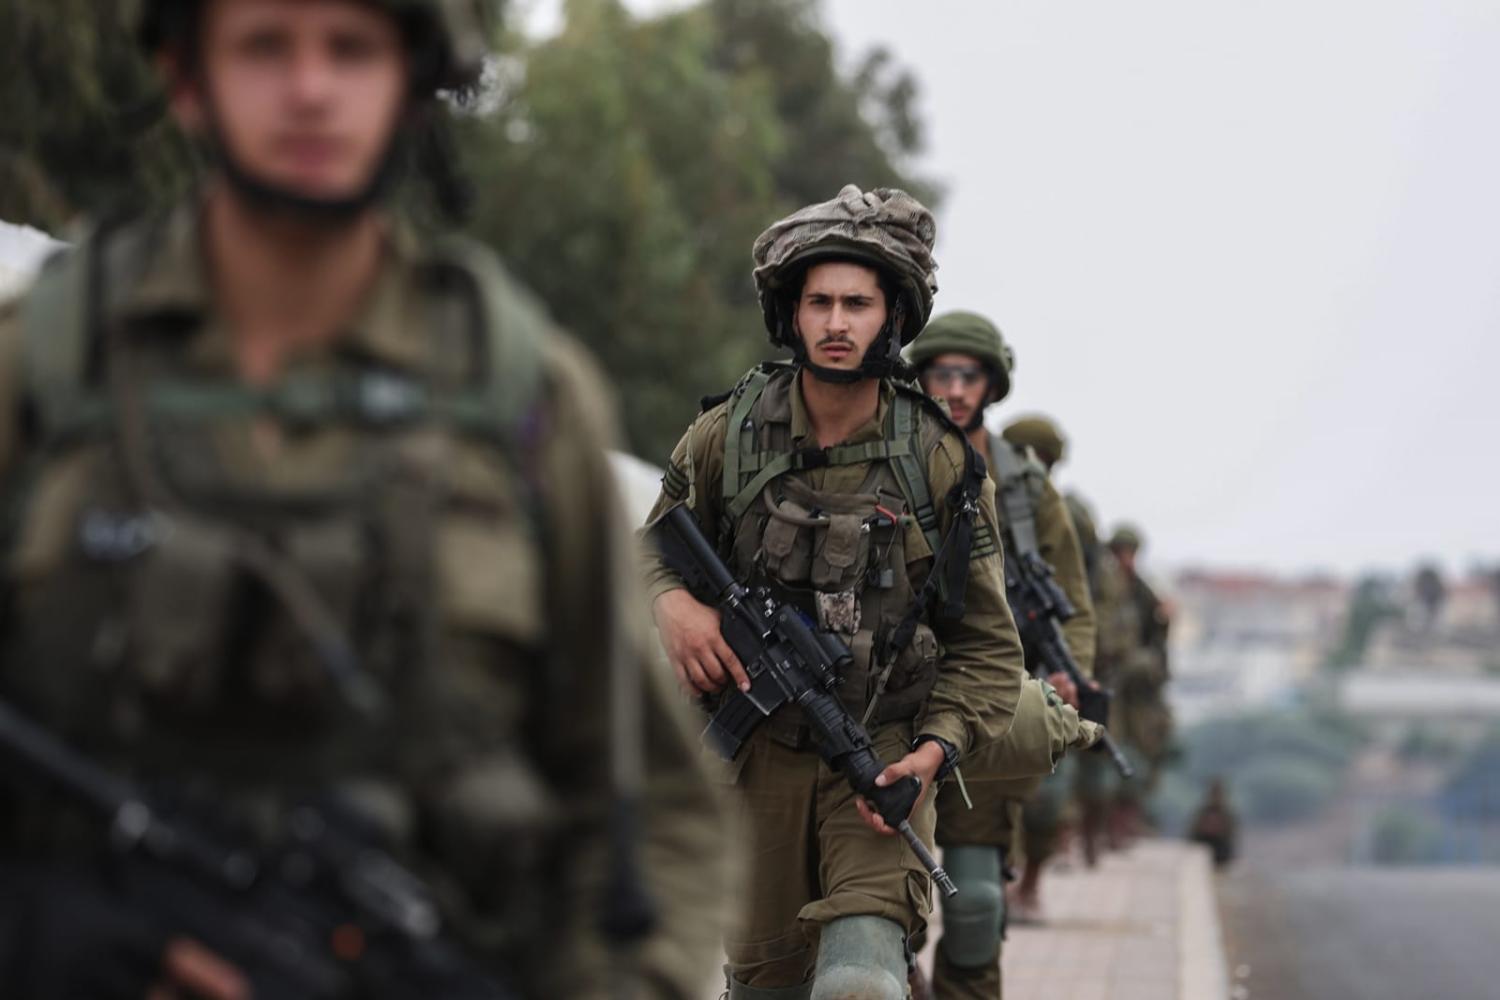 Israeli soldiers patrol in Sderot on 11 October in the days after a Hamas incursion from Gaza (Ilia Yefimovich via Getty Images)